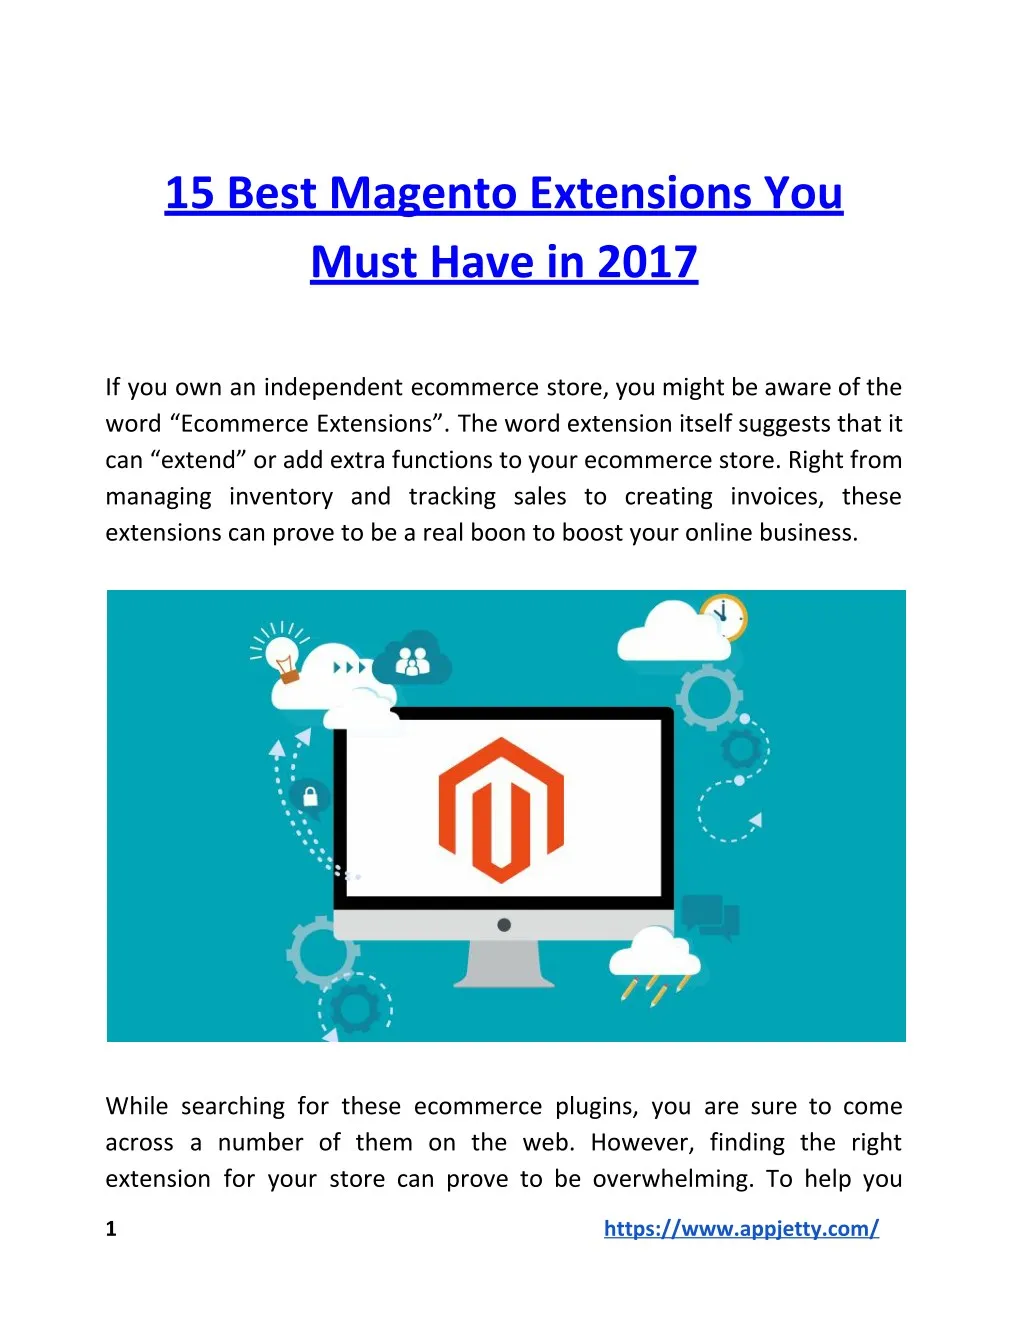 15 best magento extensions you must have in 2017